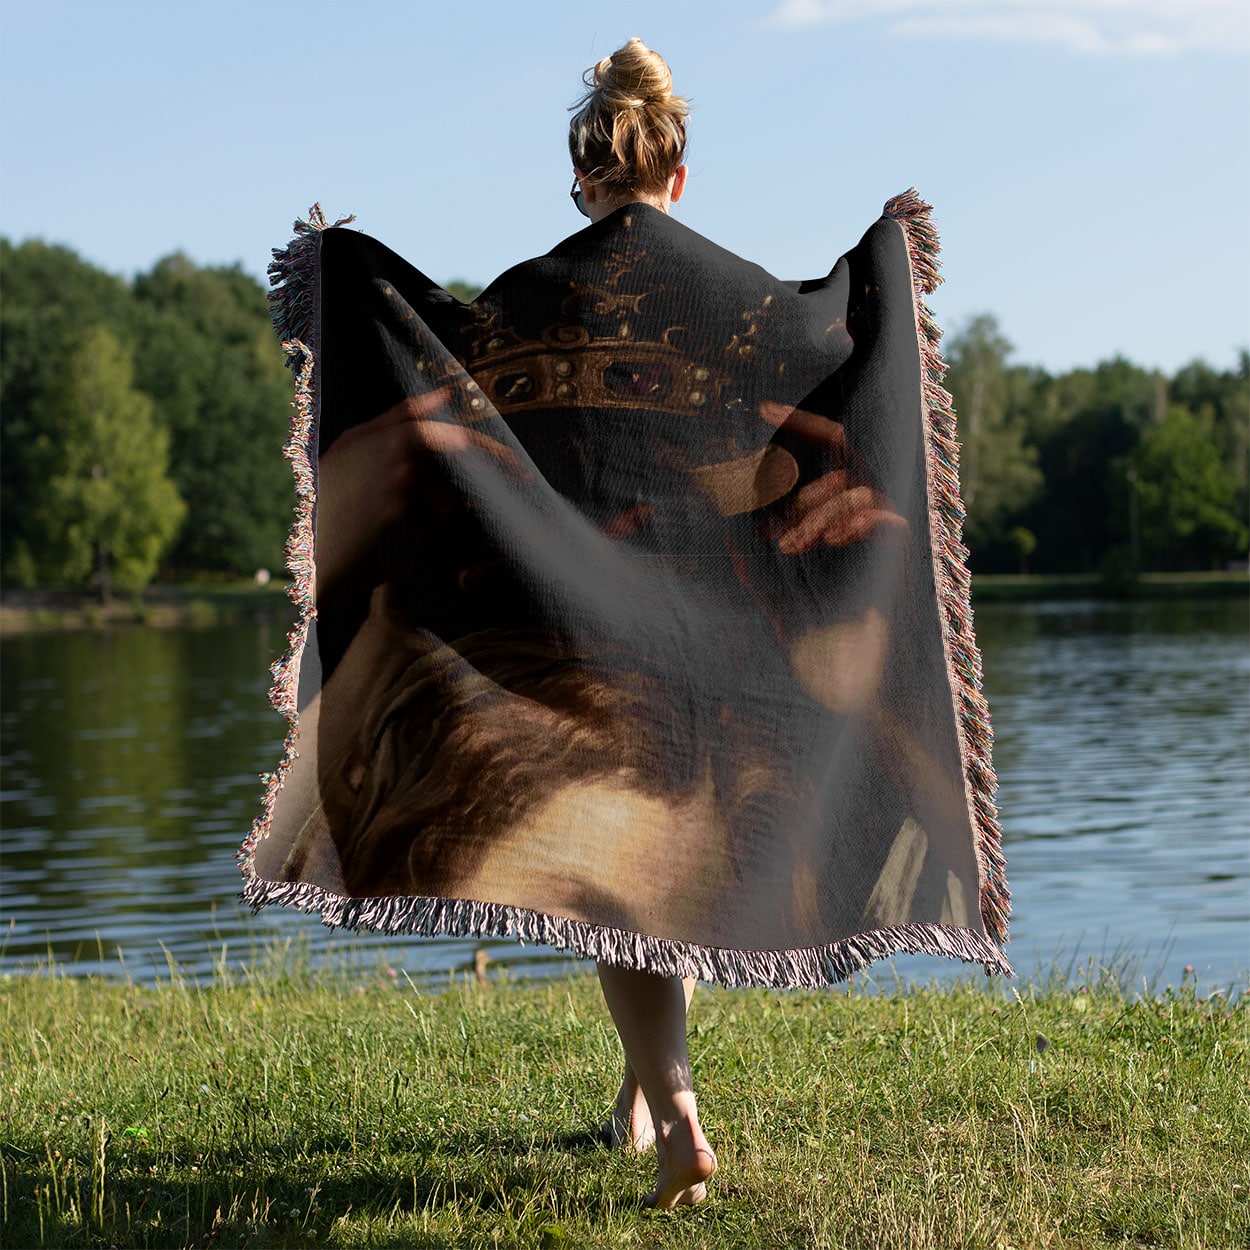 Dark Academia Woven Blanket Held on a Woman's Back Outside